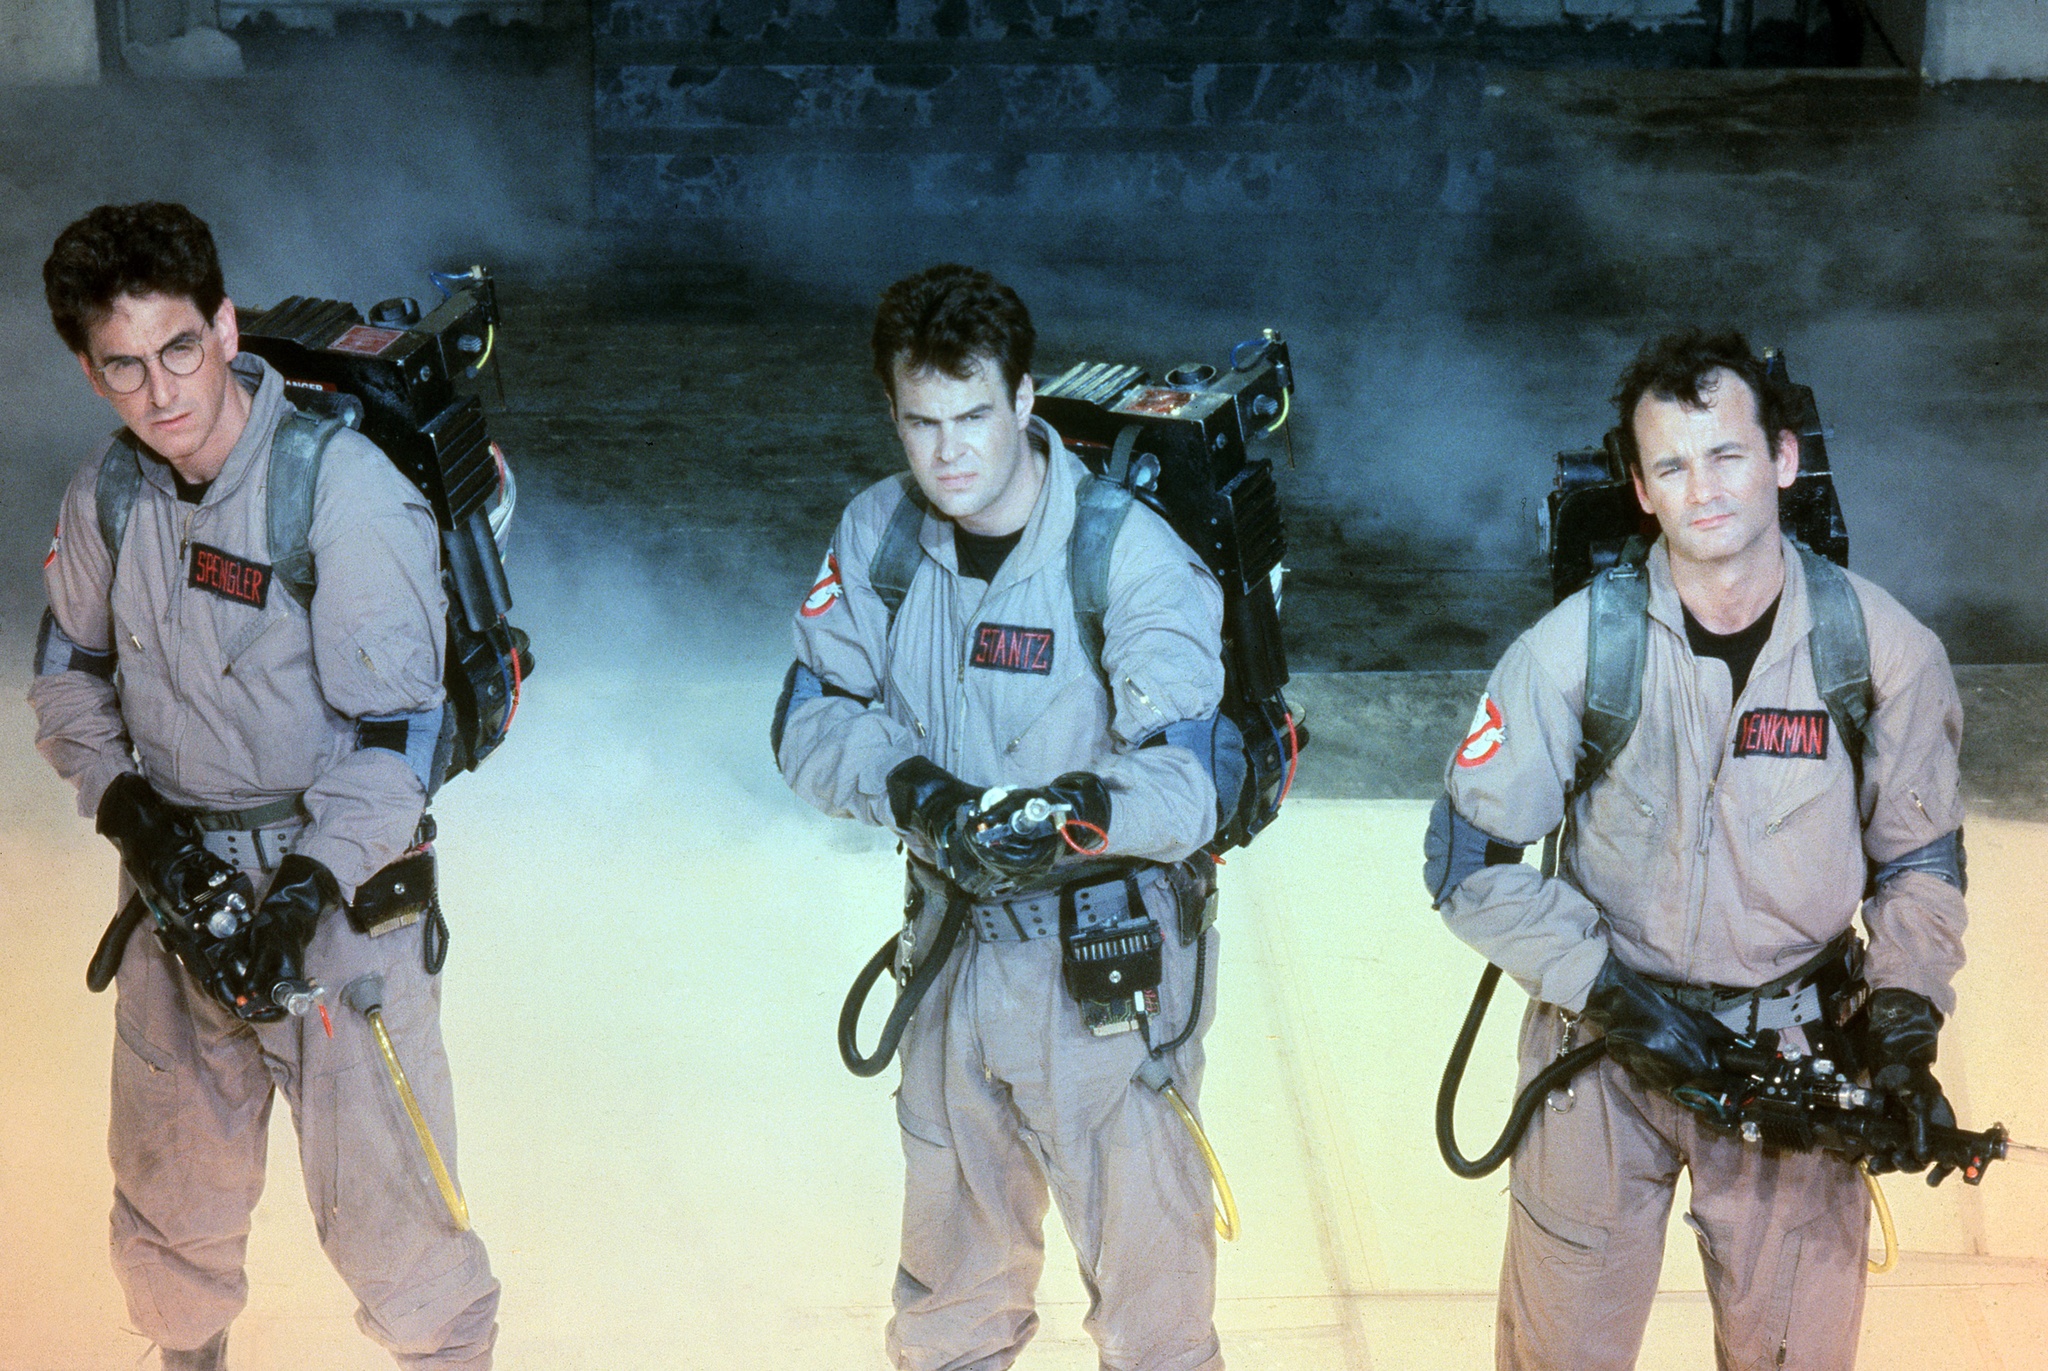 Photo of Ghostbusters. From left to right: Harold Ramis (Left); Dan Aykroyd (middle); Bill Murray (right). All are dressed in Ghostbusters one-pieces and holding ghost vacuums from film. 